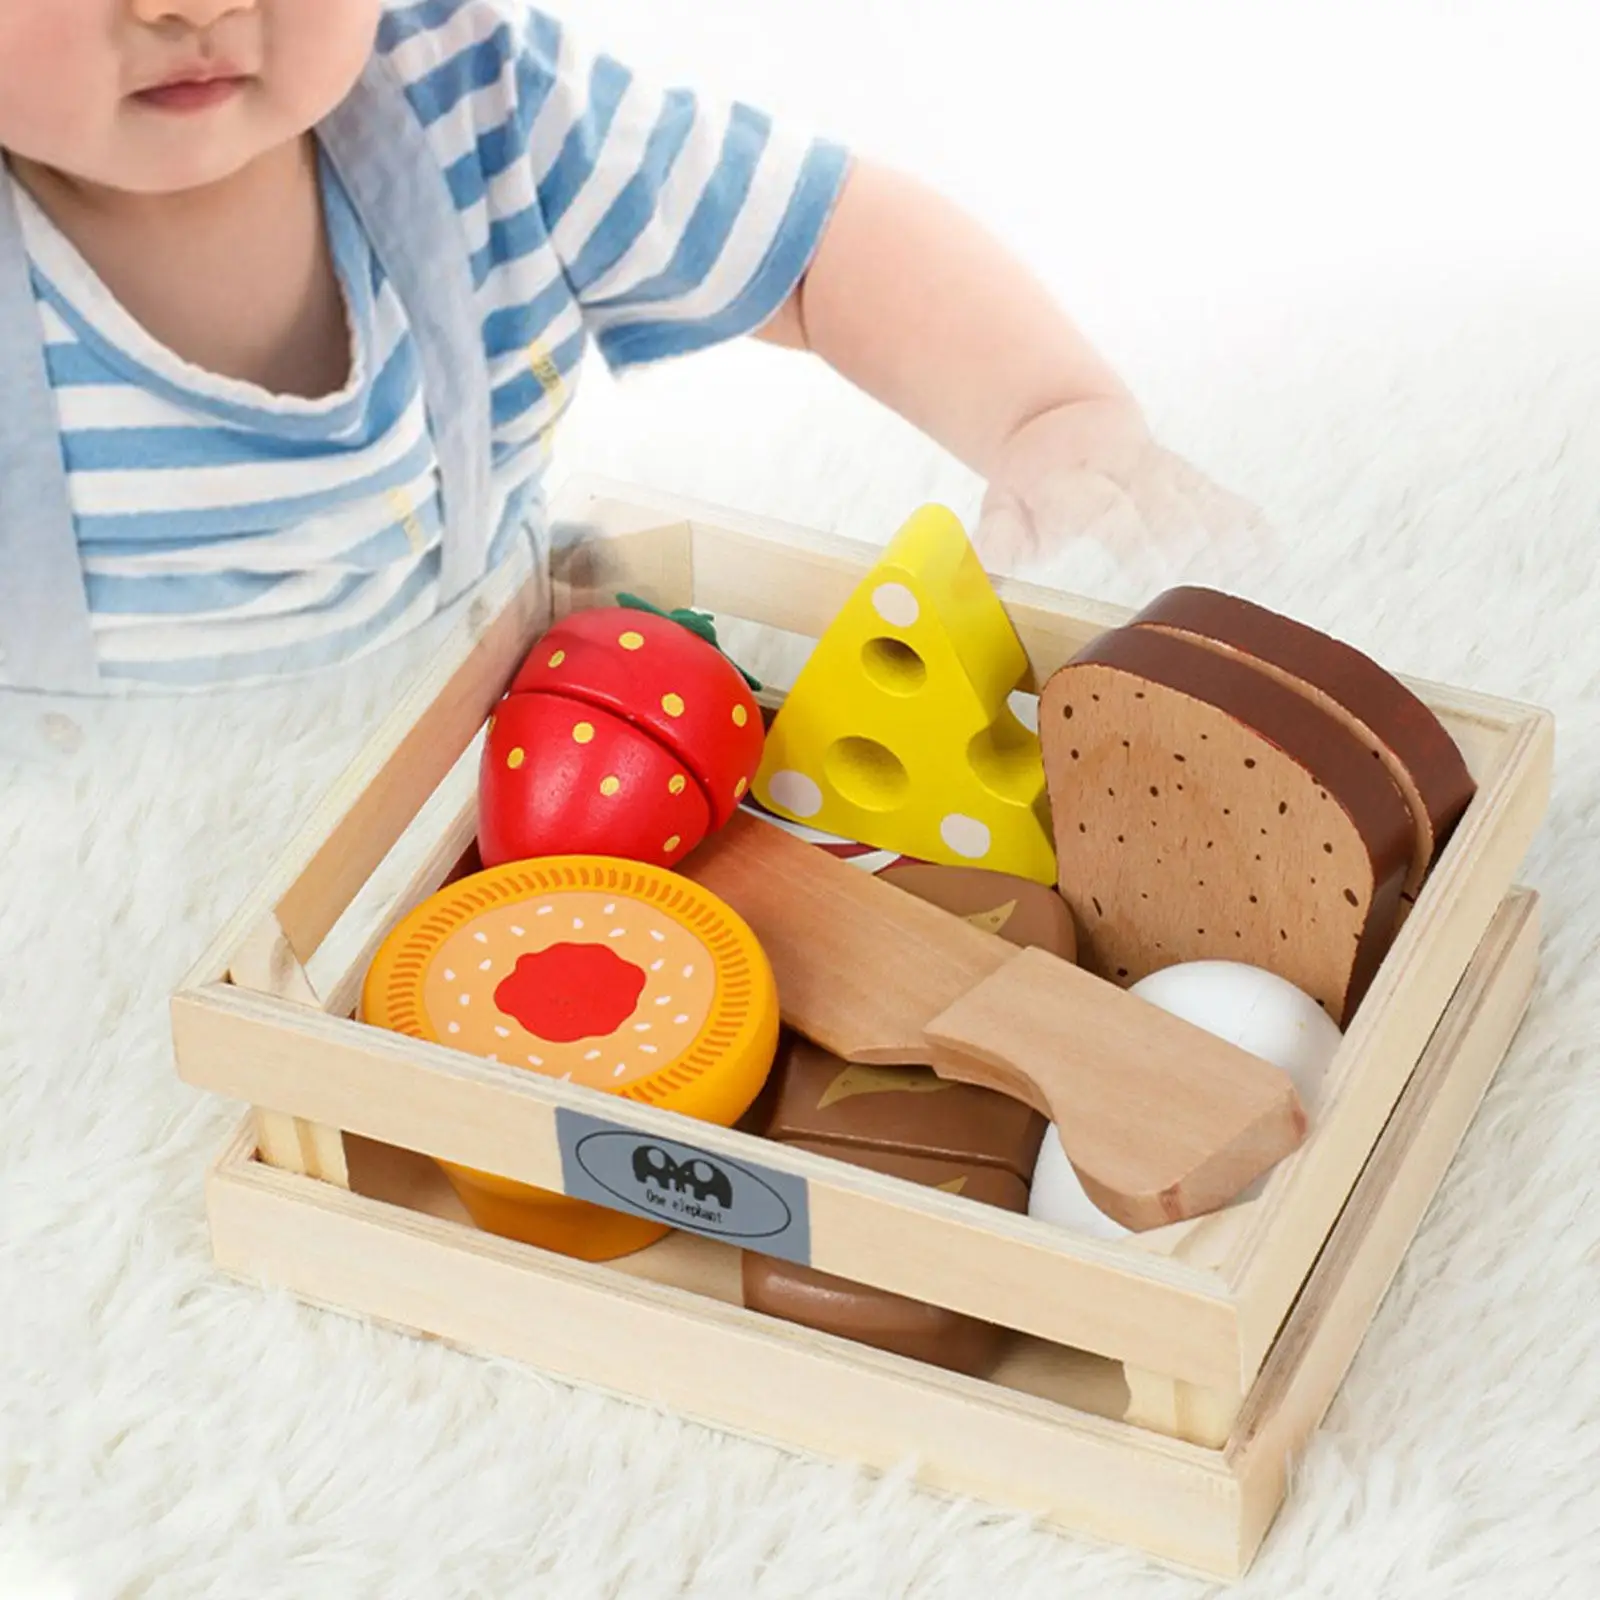 Cutting Play Food Toy Role Play Educational Toy Kids Kitchen Set for Toddler